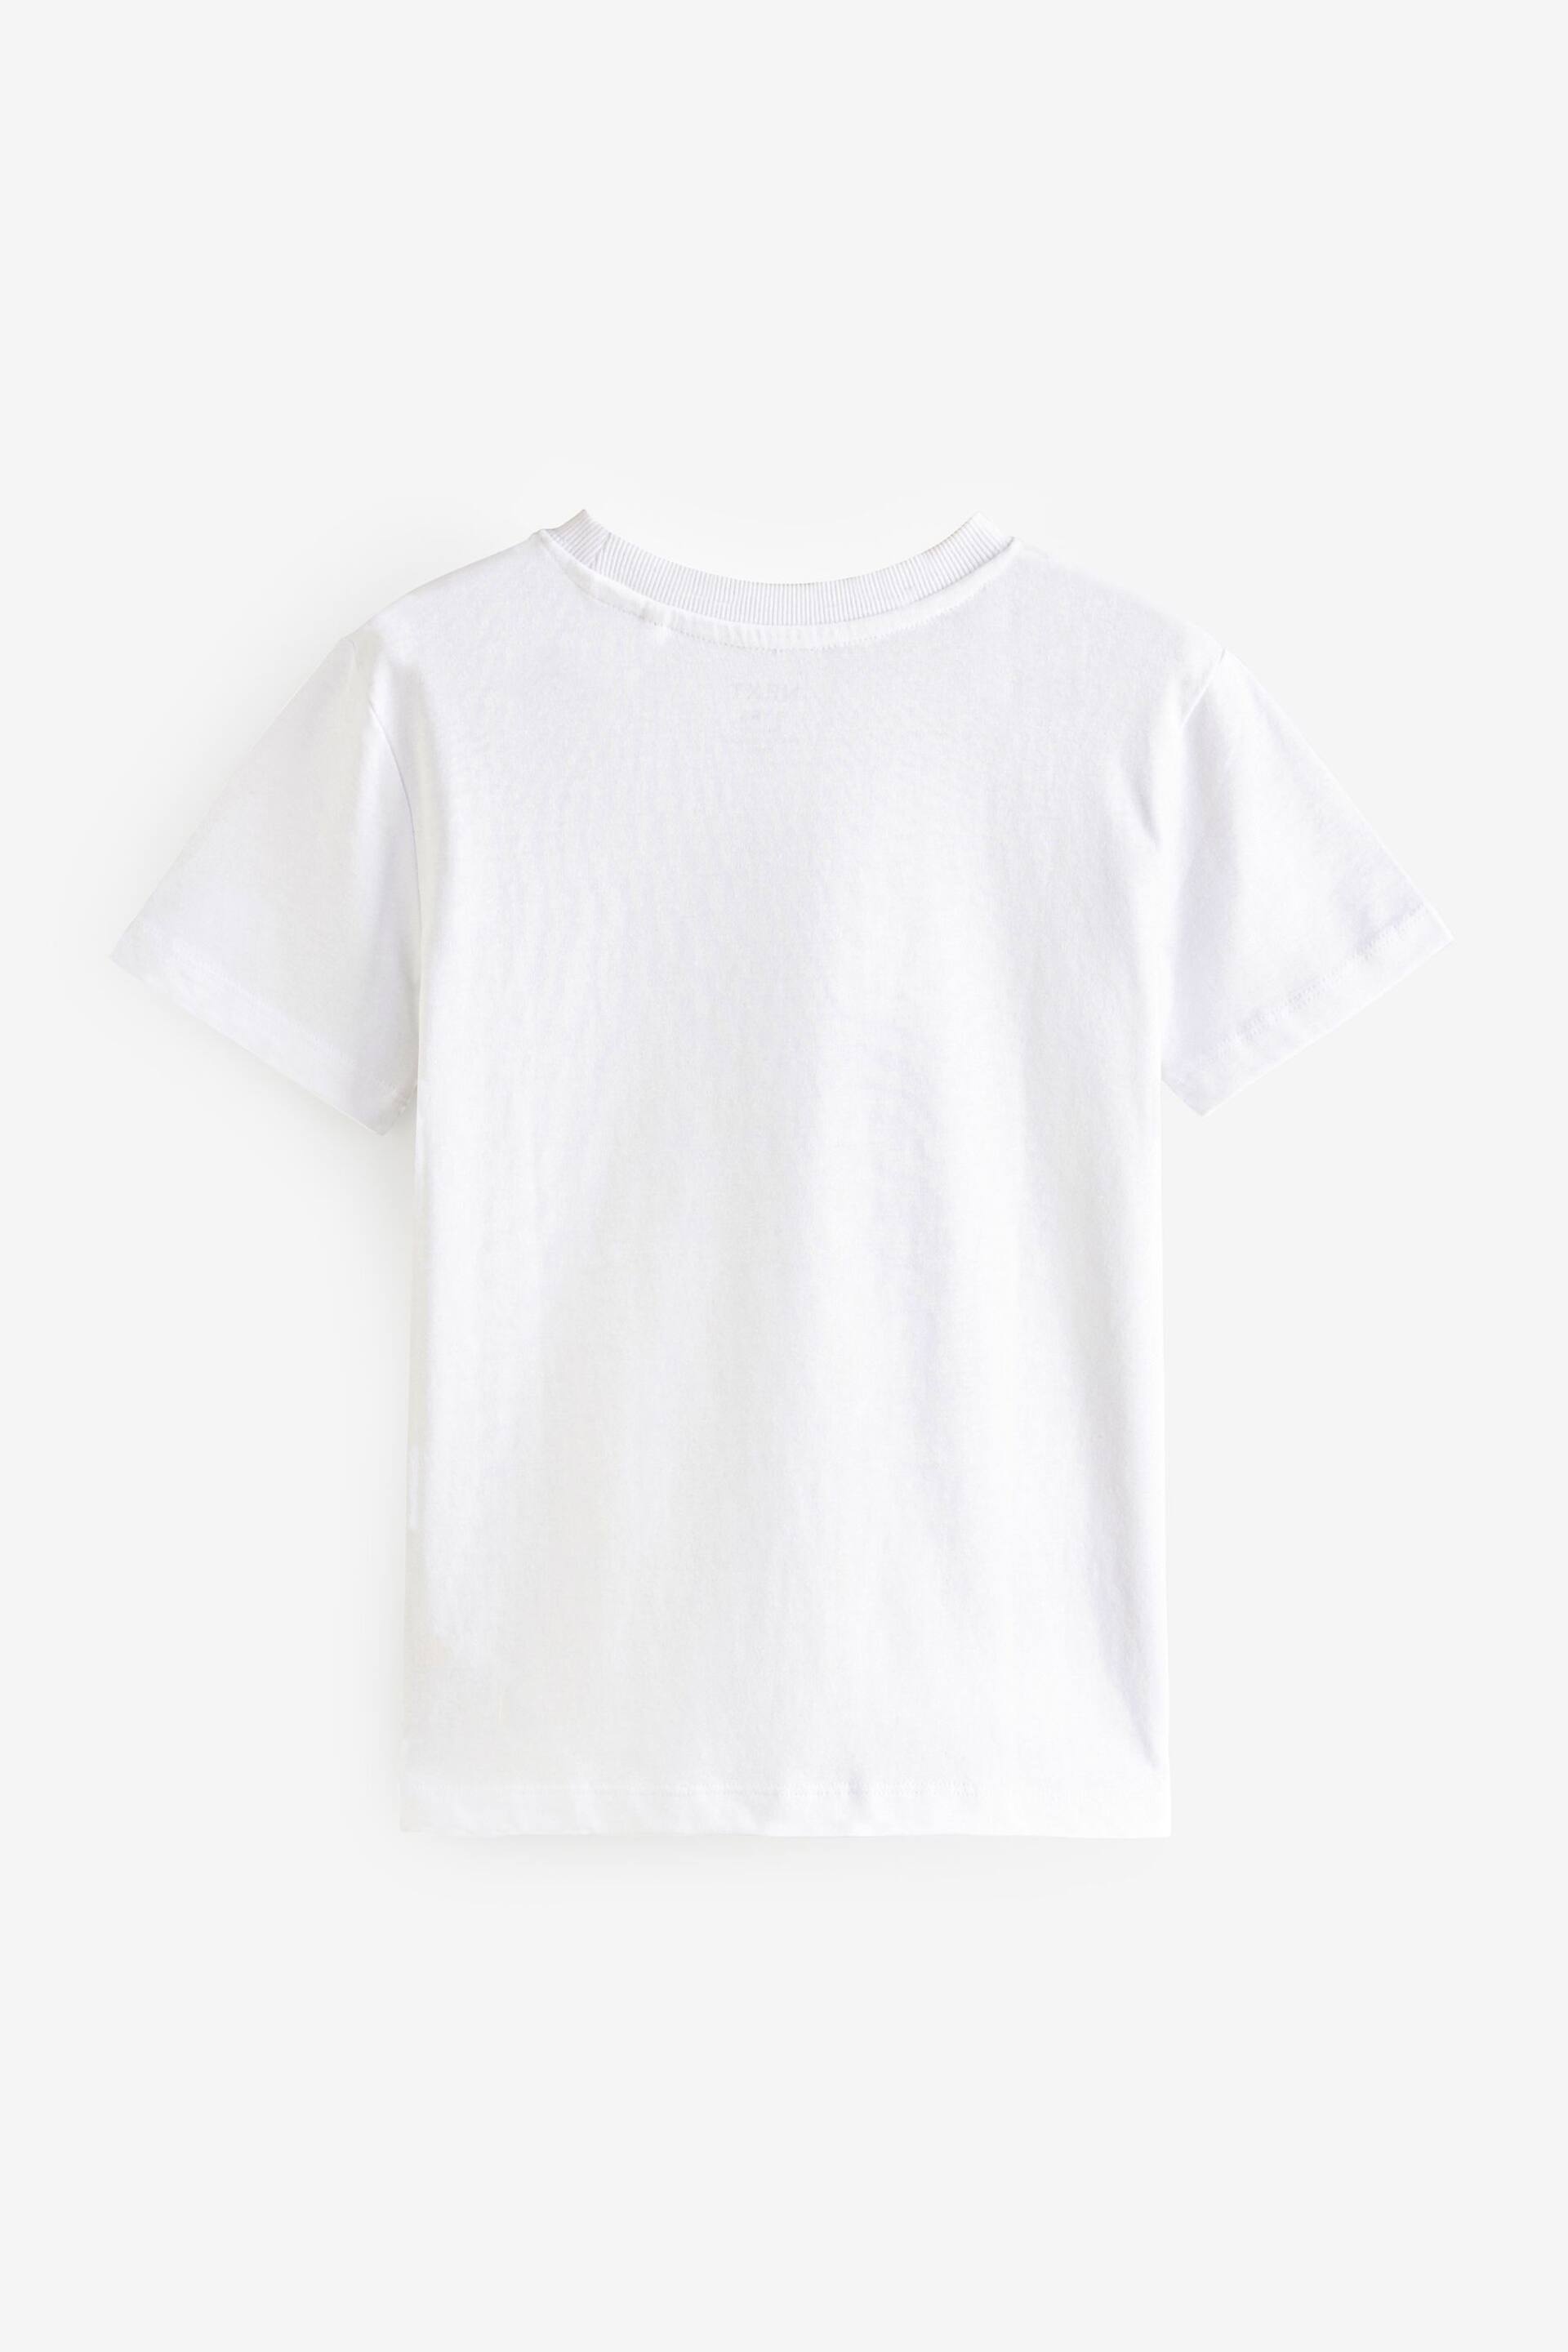 White Happy Face Short Sleeve Graphic T-Shirt (3-16yrs) - Image 2 of 3